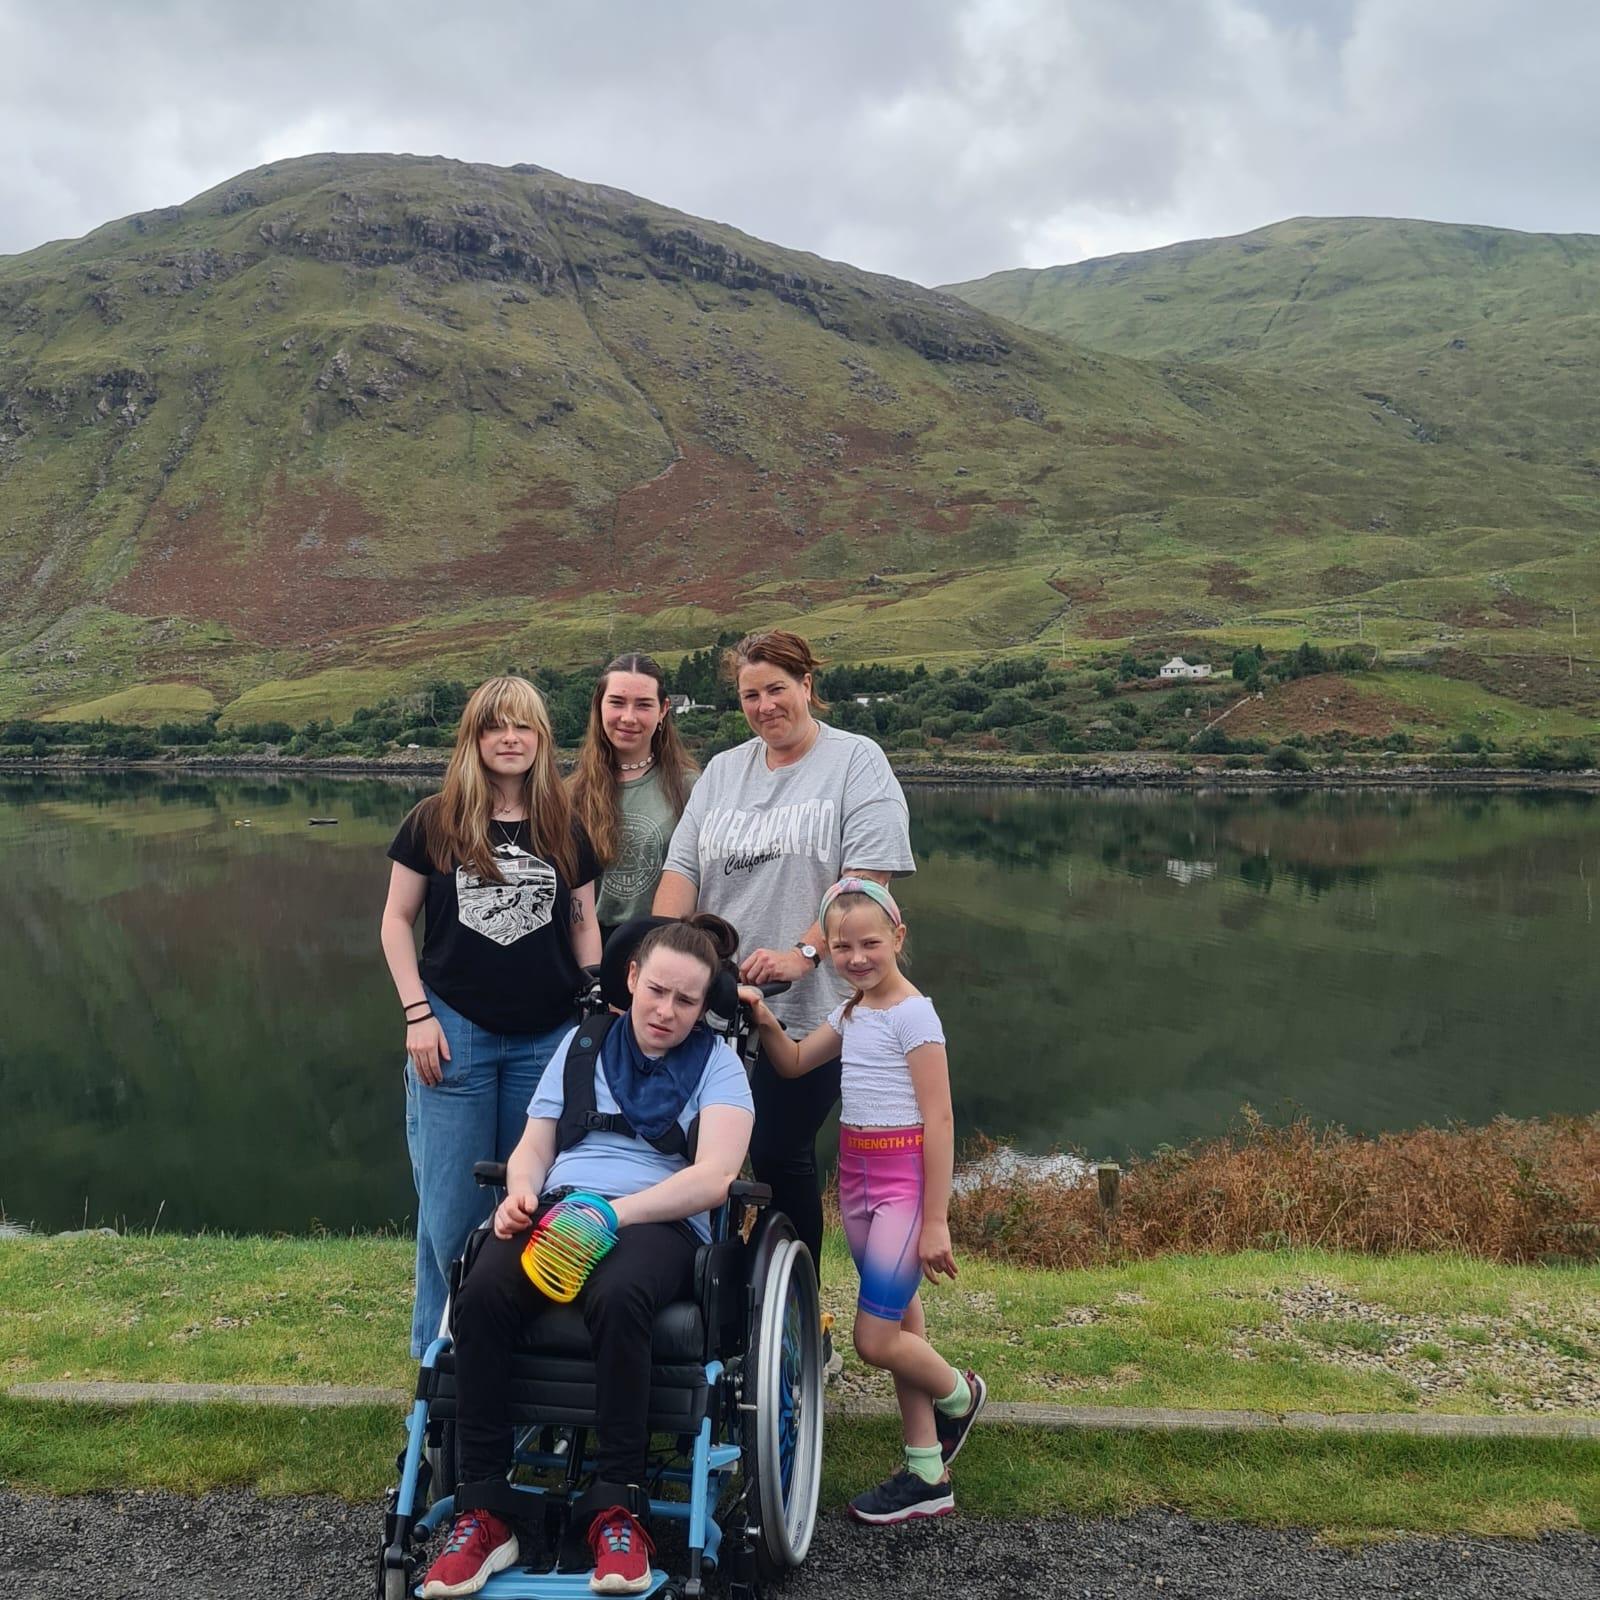 Lorraine Dempsey and her daughters on Sunday in front of Búcán Mountain